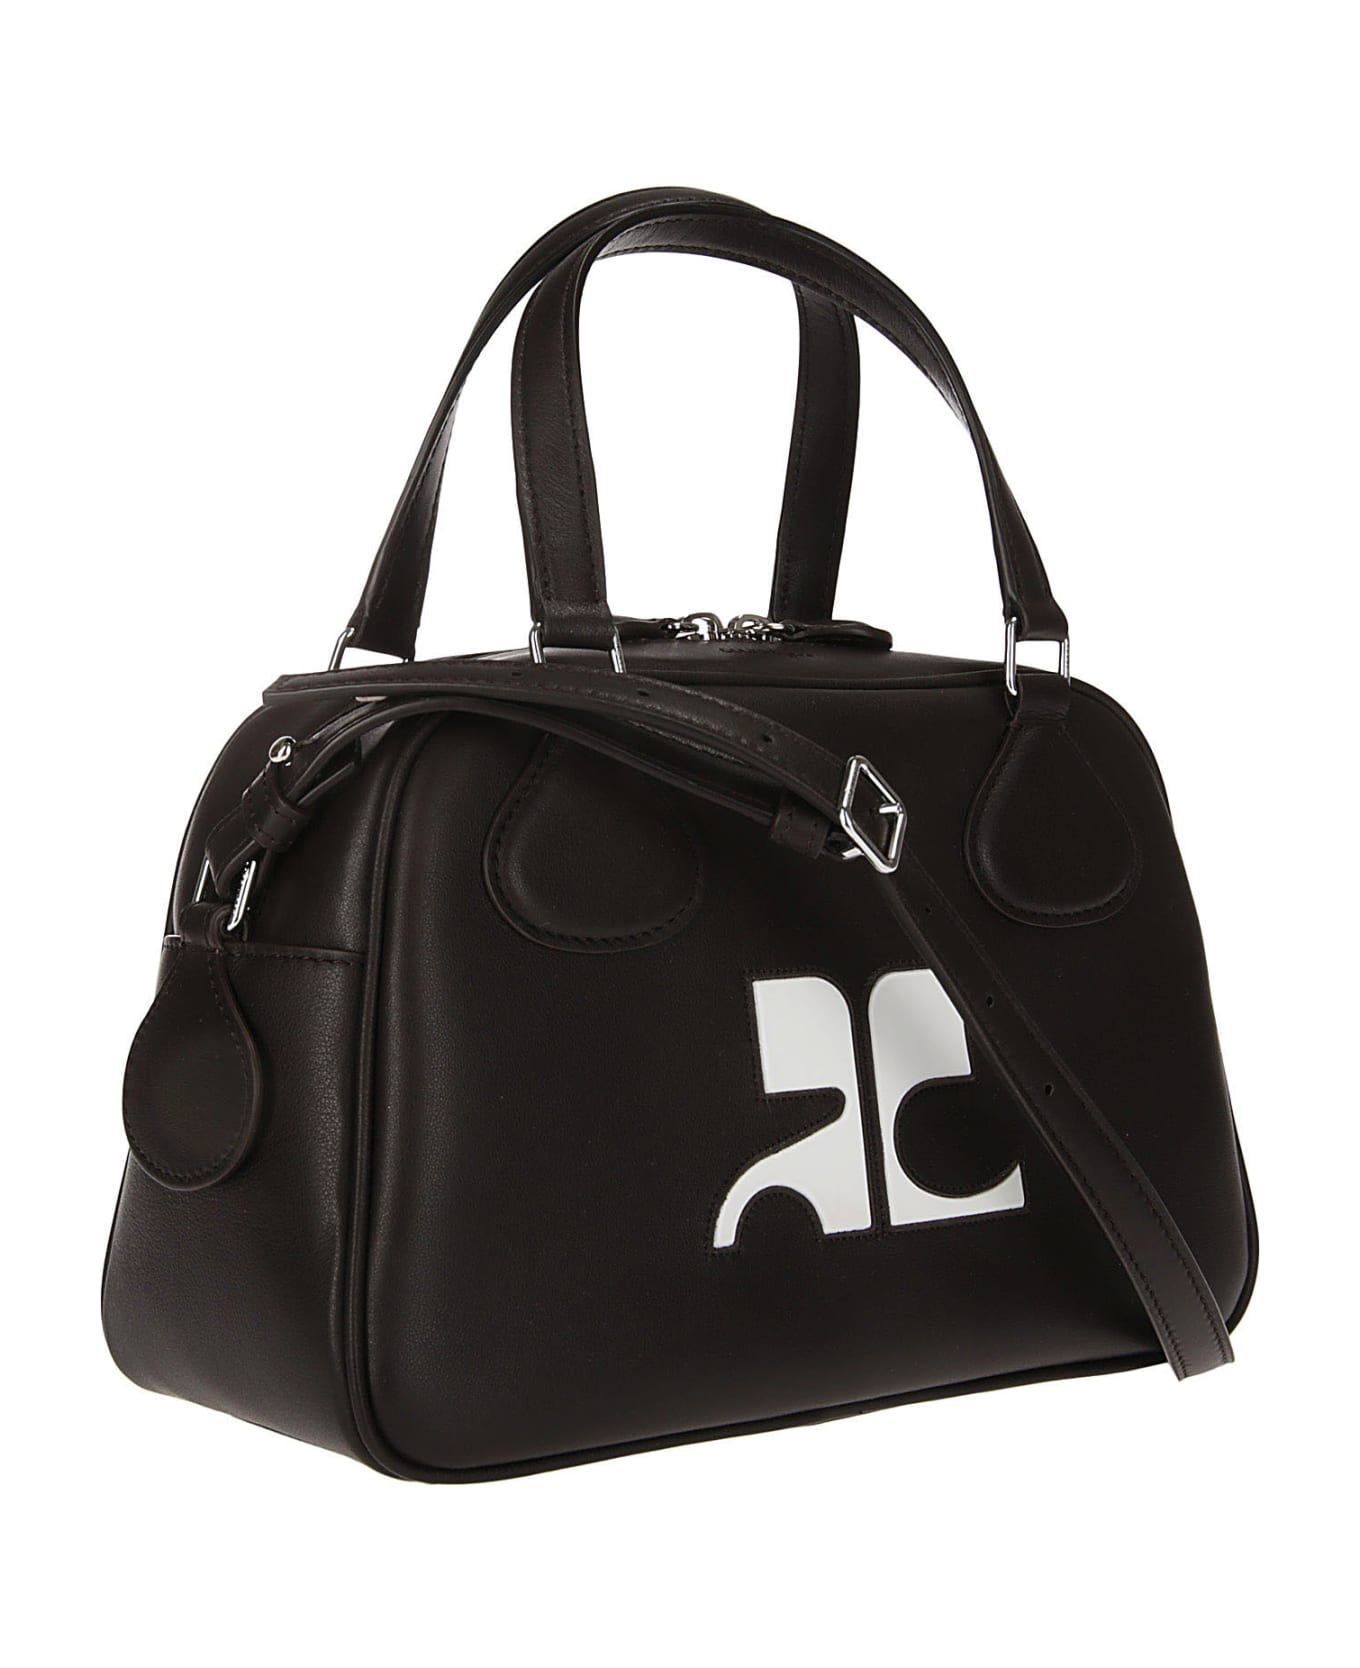 Courrèges Reedition Bowling Bag - CHOCOLATE 